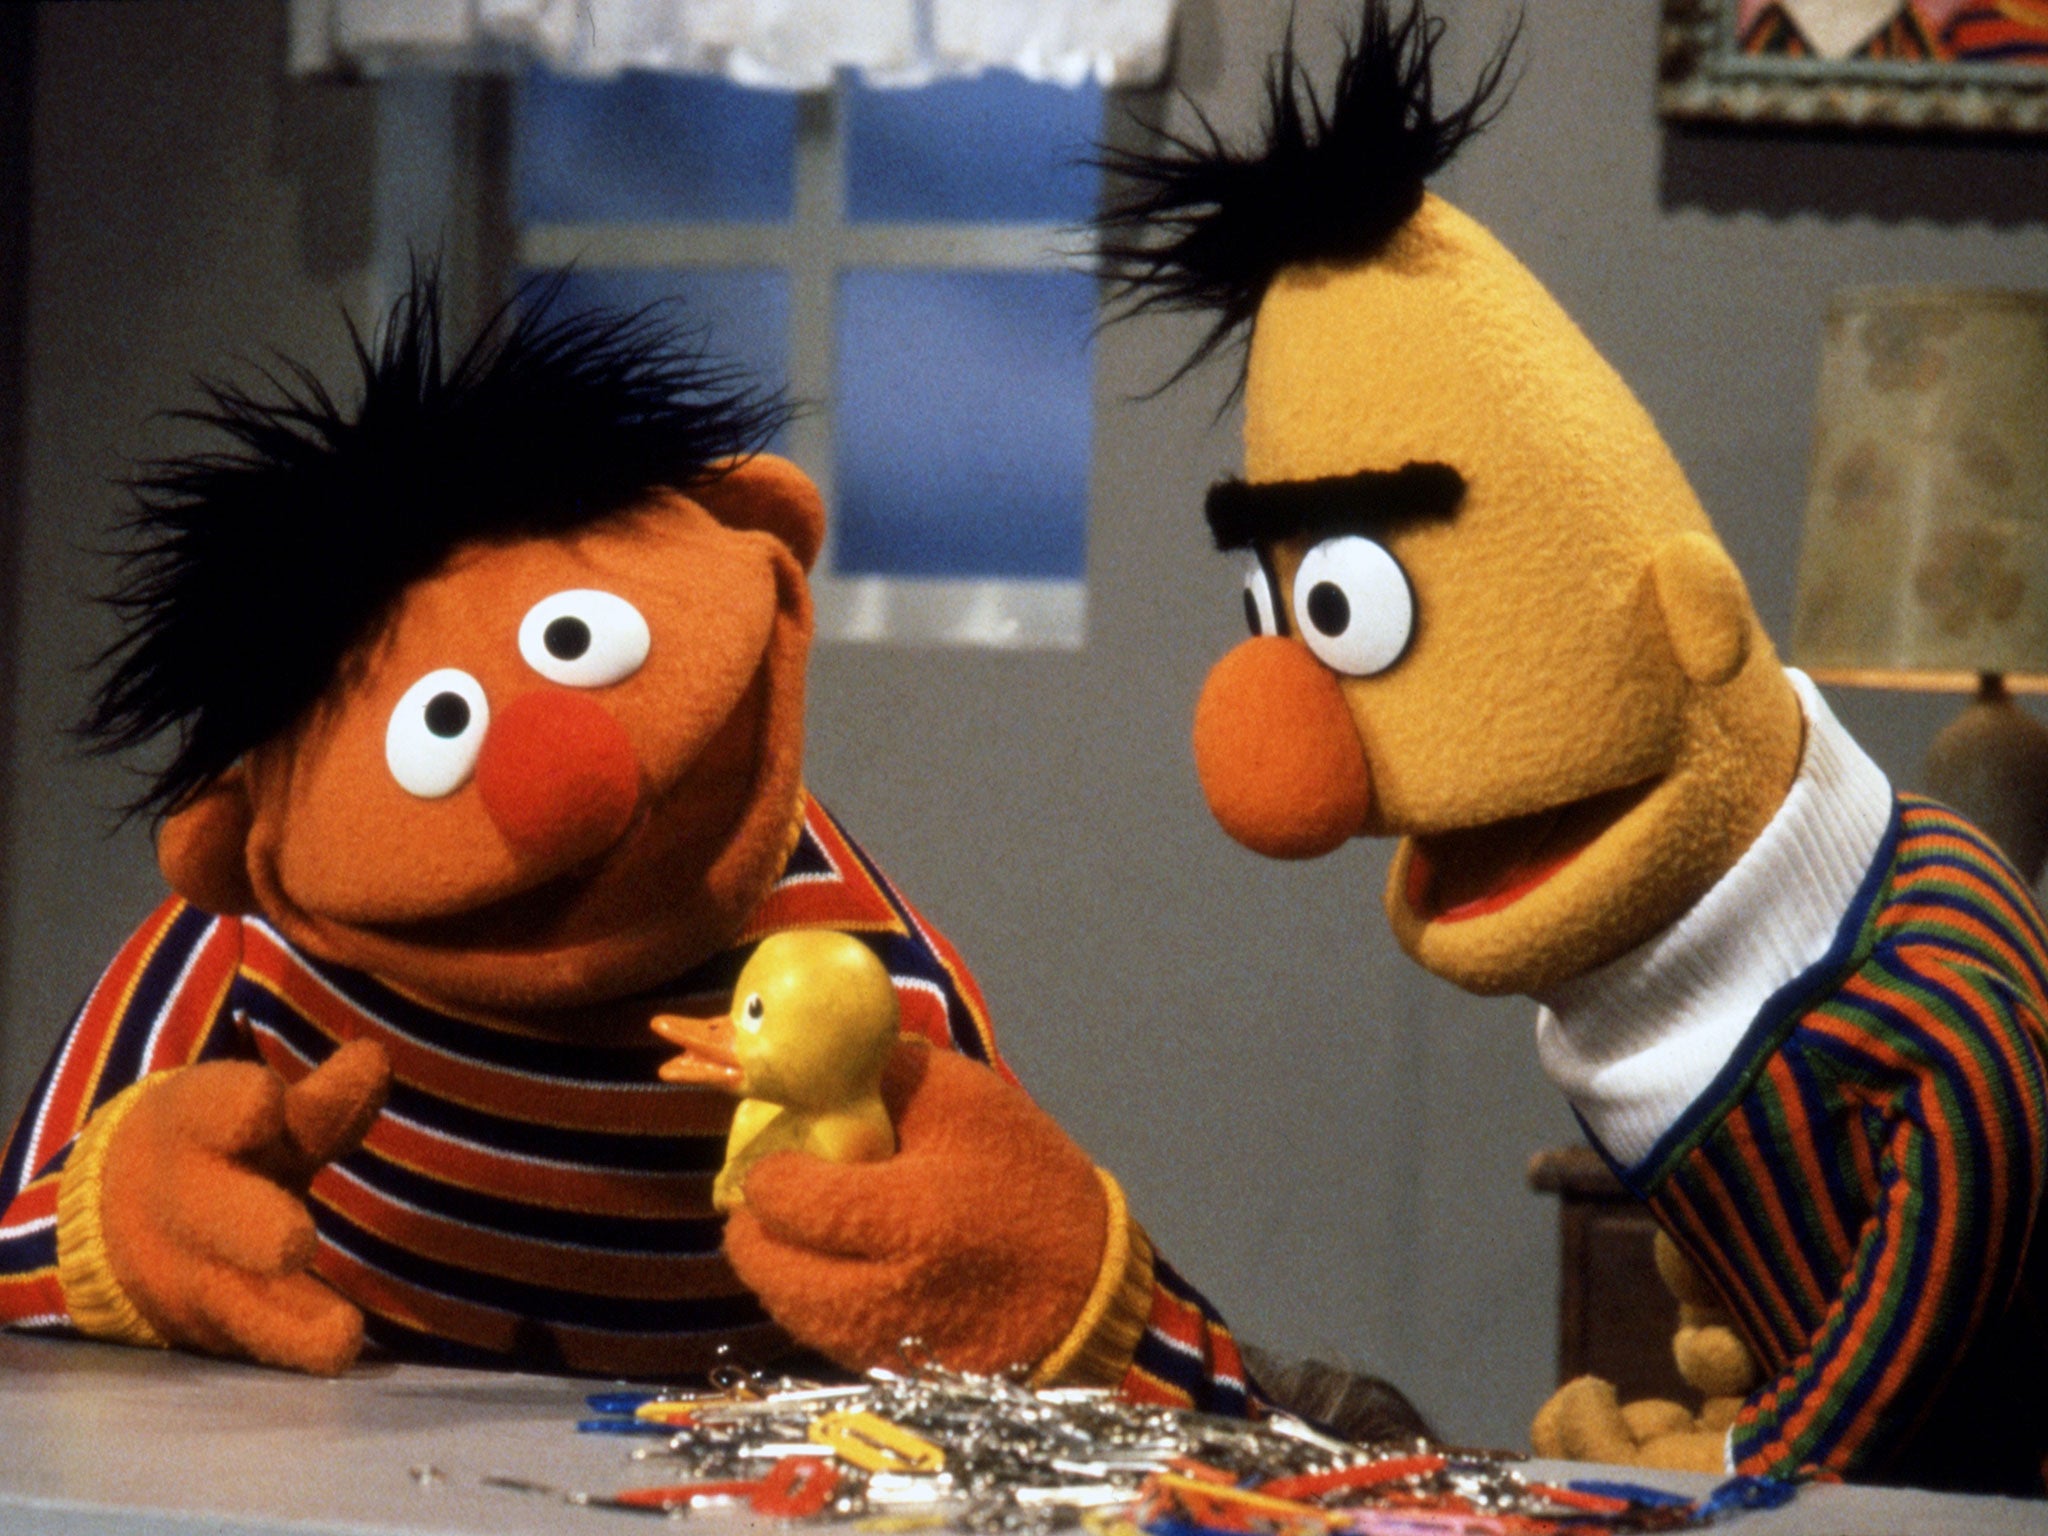 The bakery refused to produce the cake carrying a picture of Bert and Ernie and the slogan “support gay marriage”